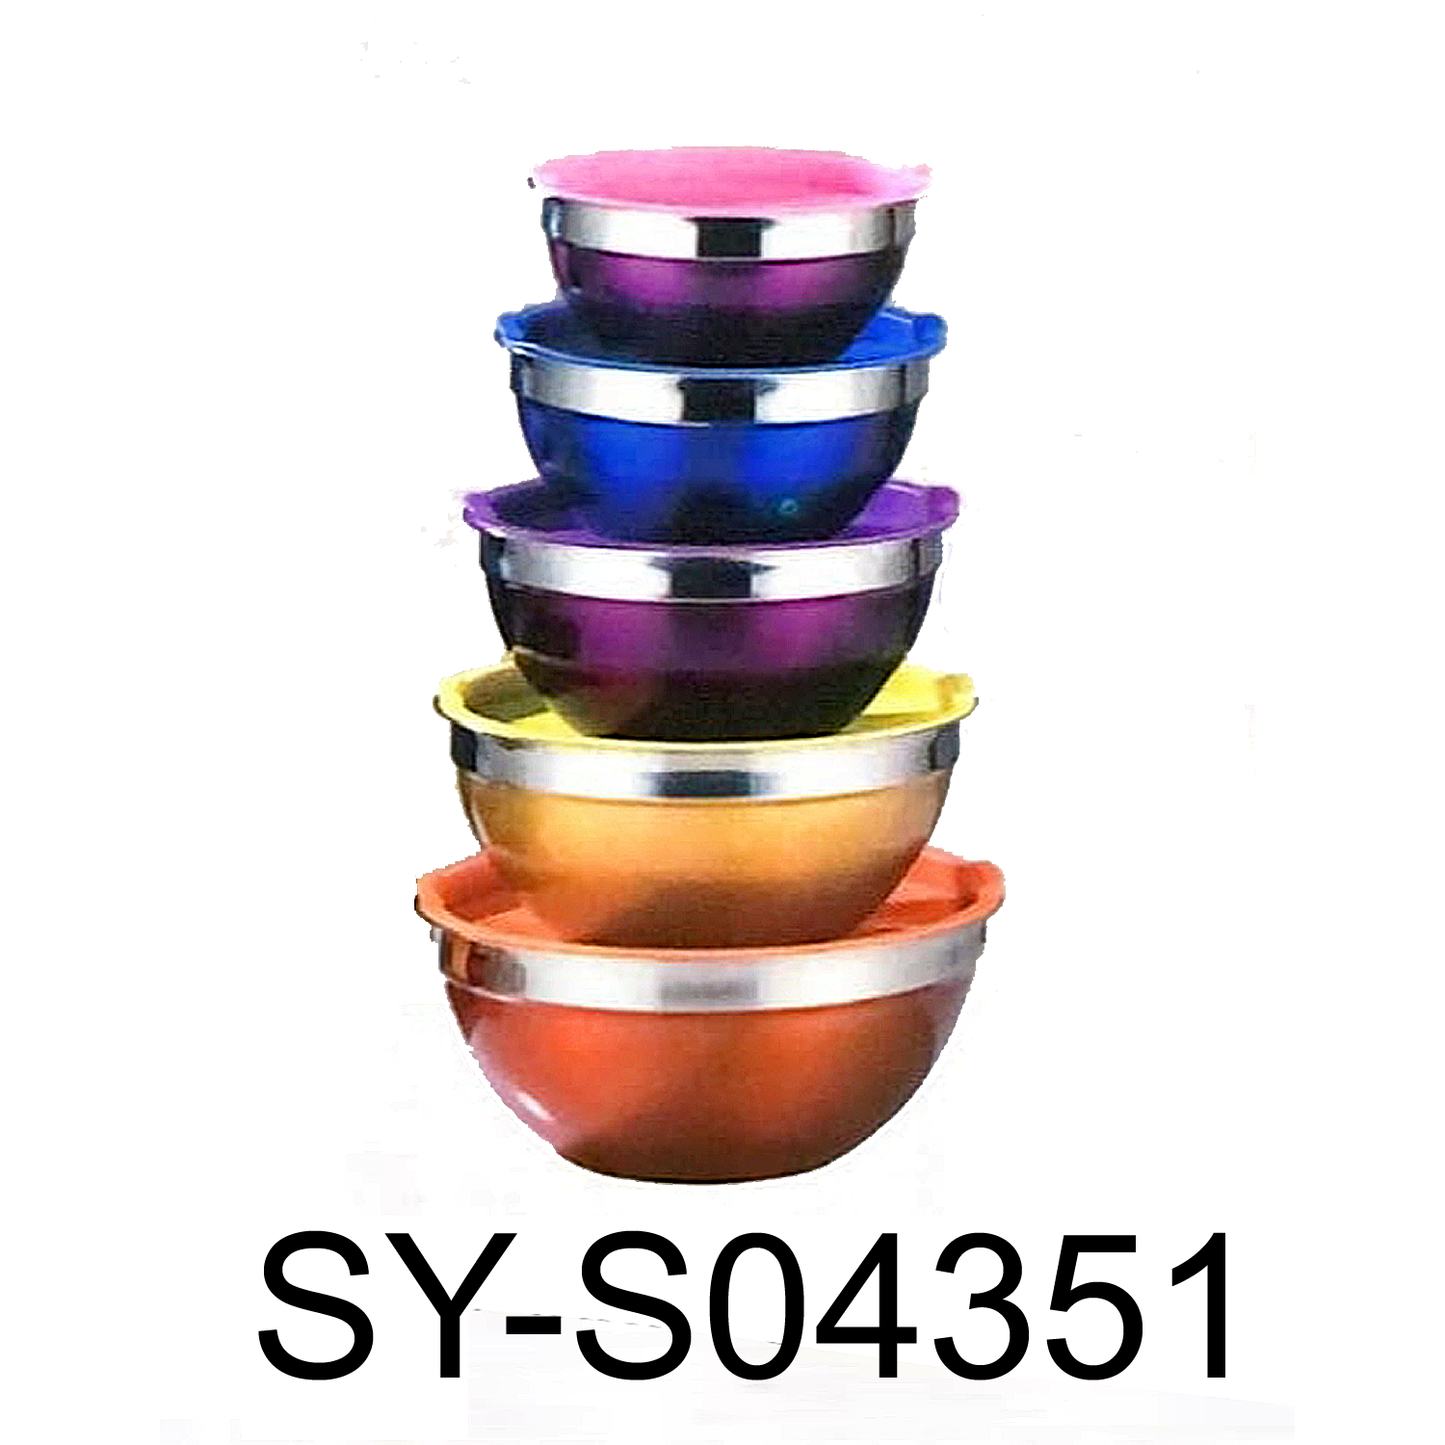 Set of 5 - Colorful Mixing Bowls - Plastic Mixing Bowl Set for